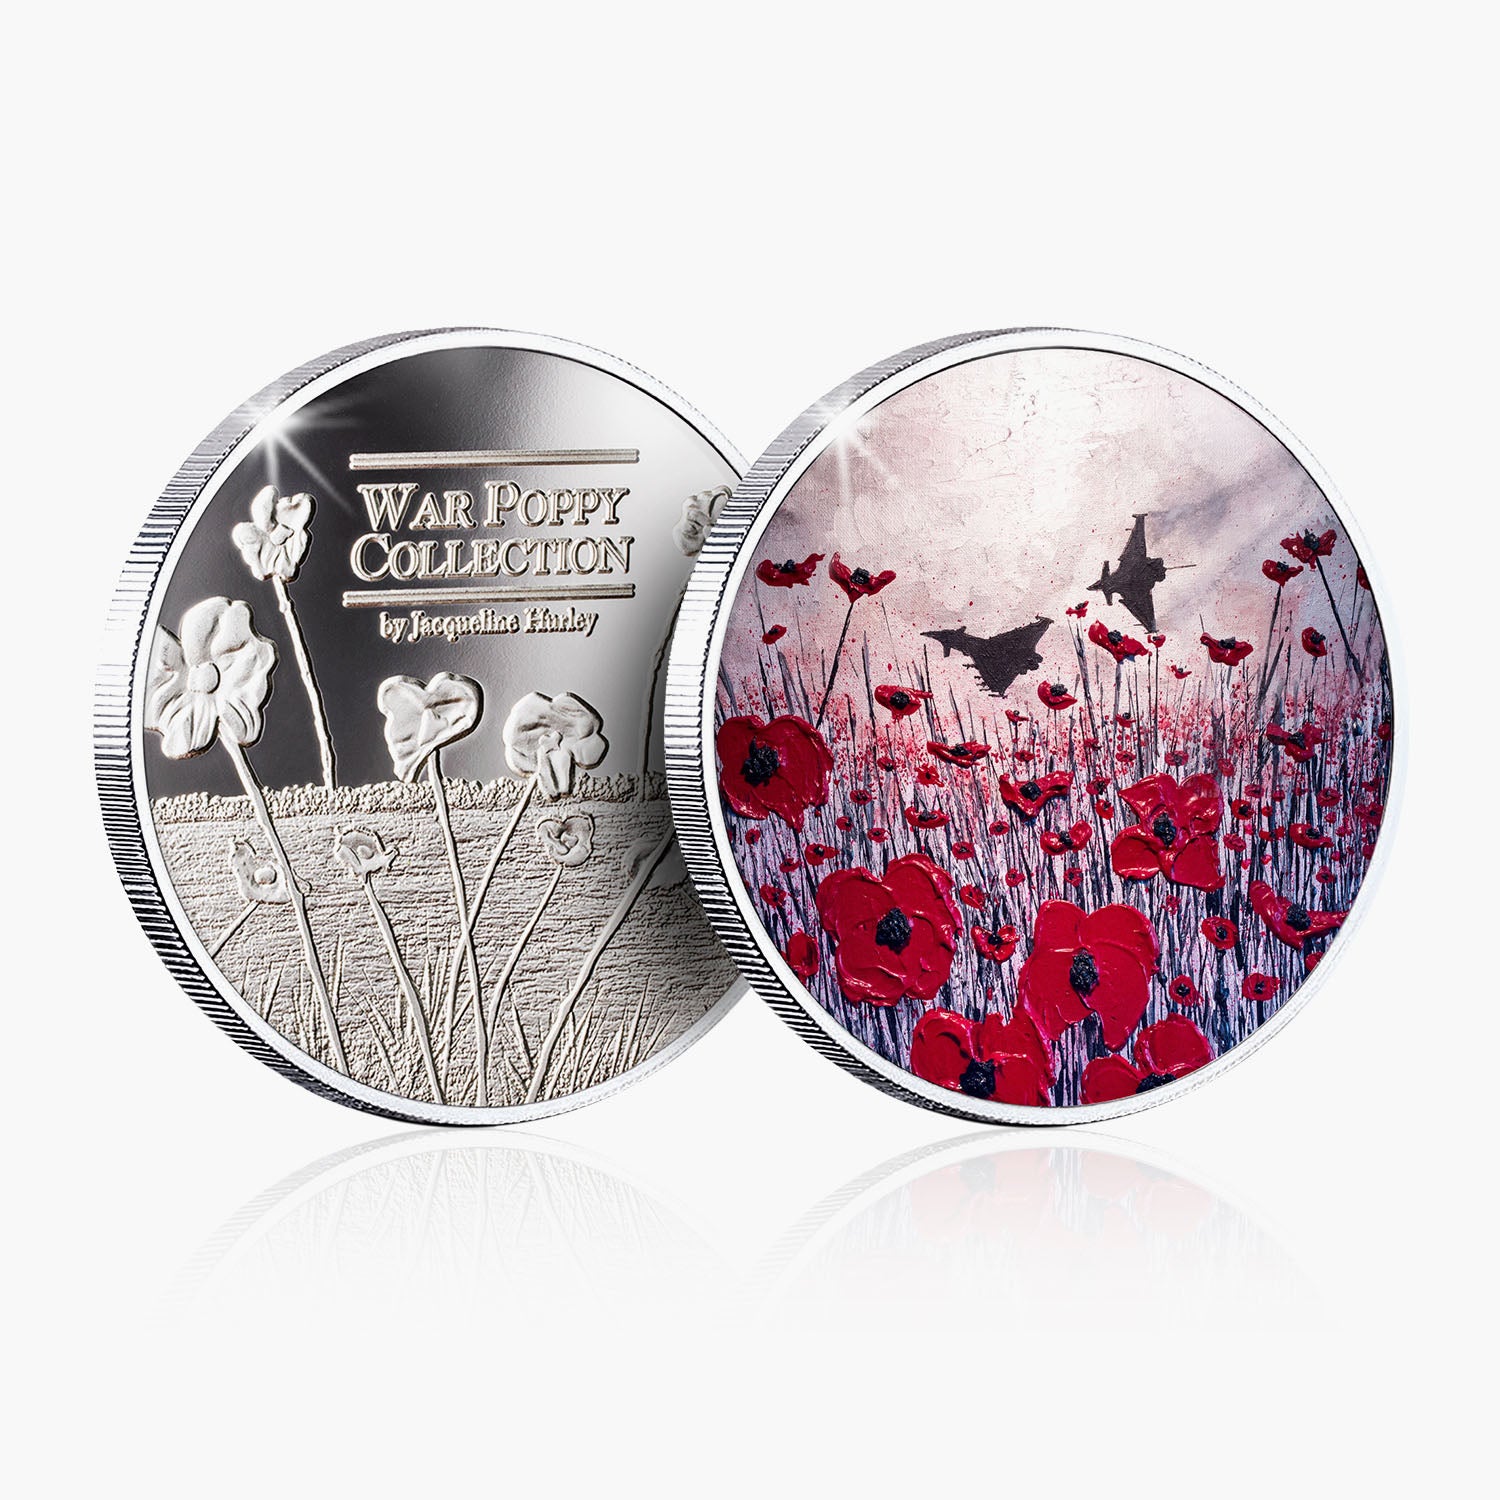 Flight For Freedom Silver-Plated Commemorative